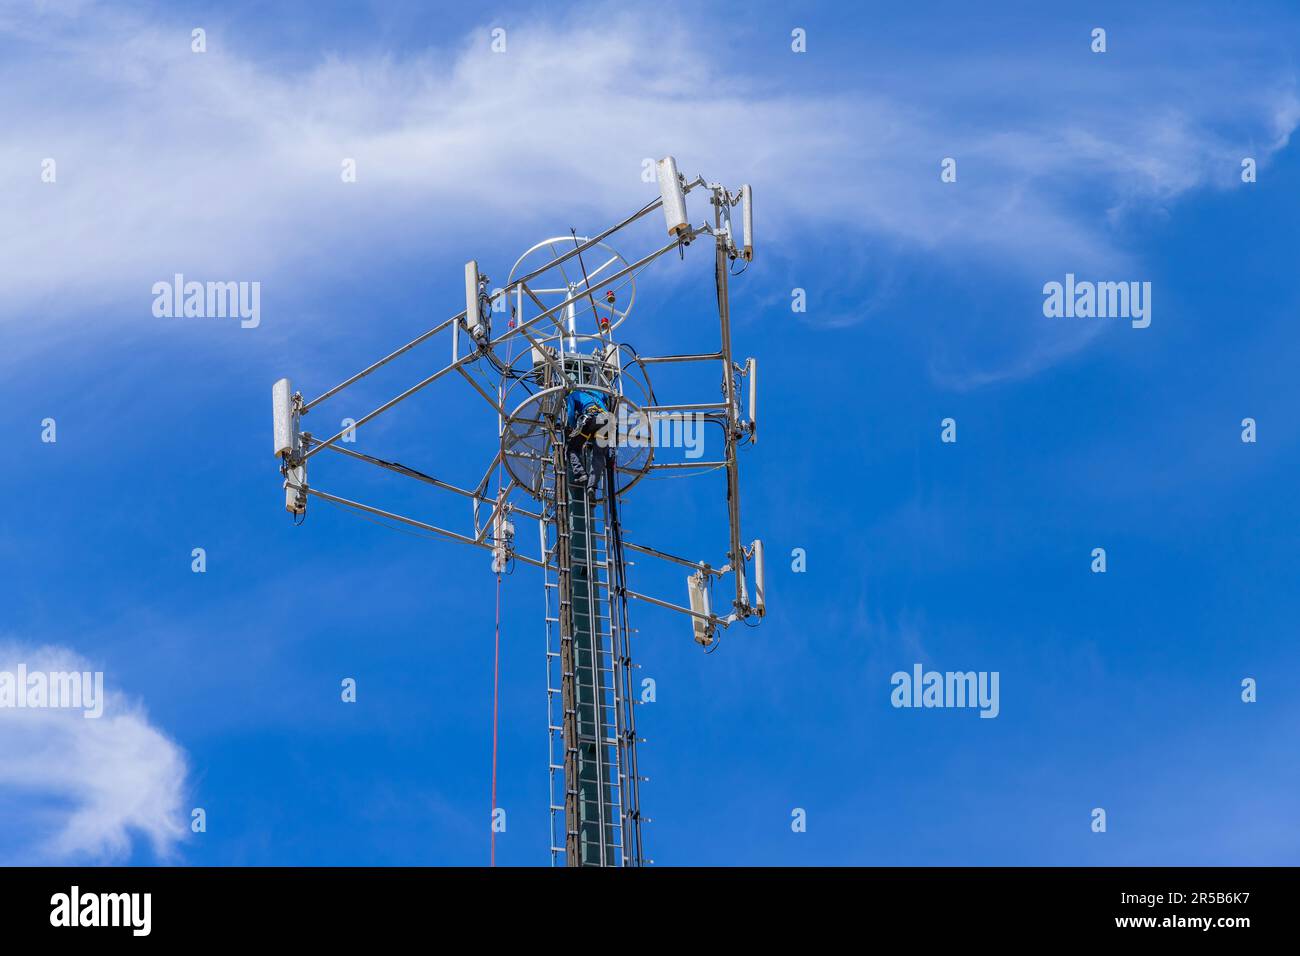 Fatima, Portugal: 30 April 2023: Working at a cellphone antenna tower for maintaining. technician worker repair telecommunication tower. Fatima, Portu Stock Photo